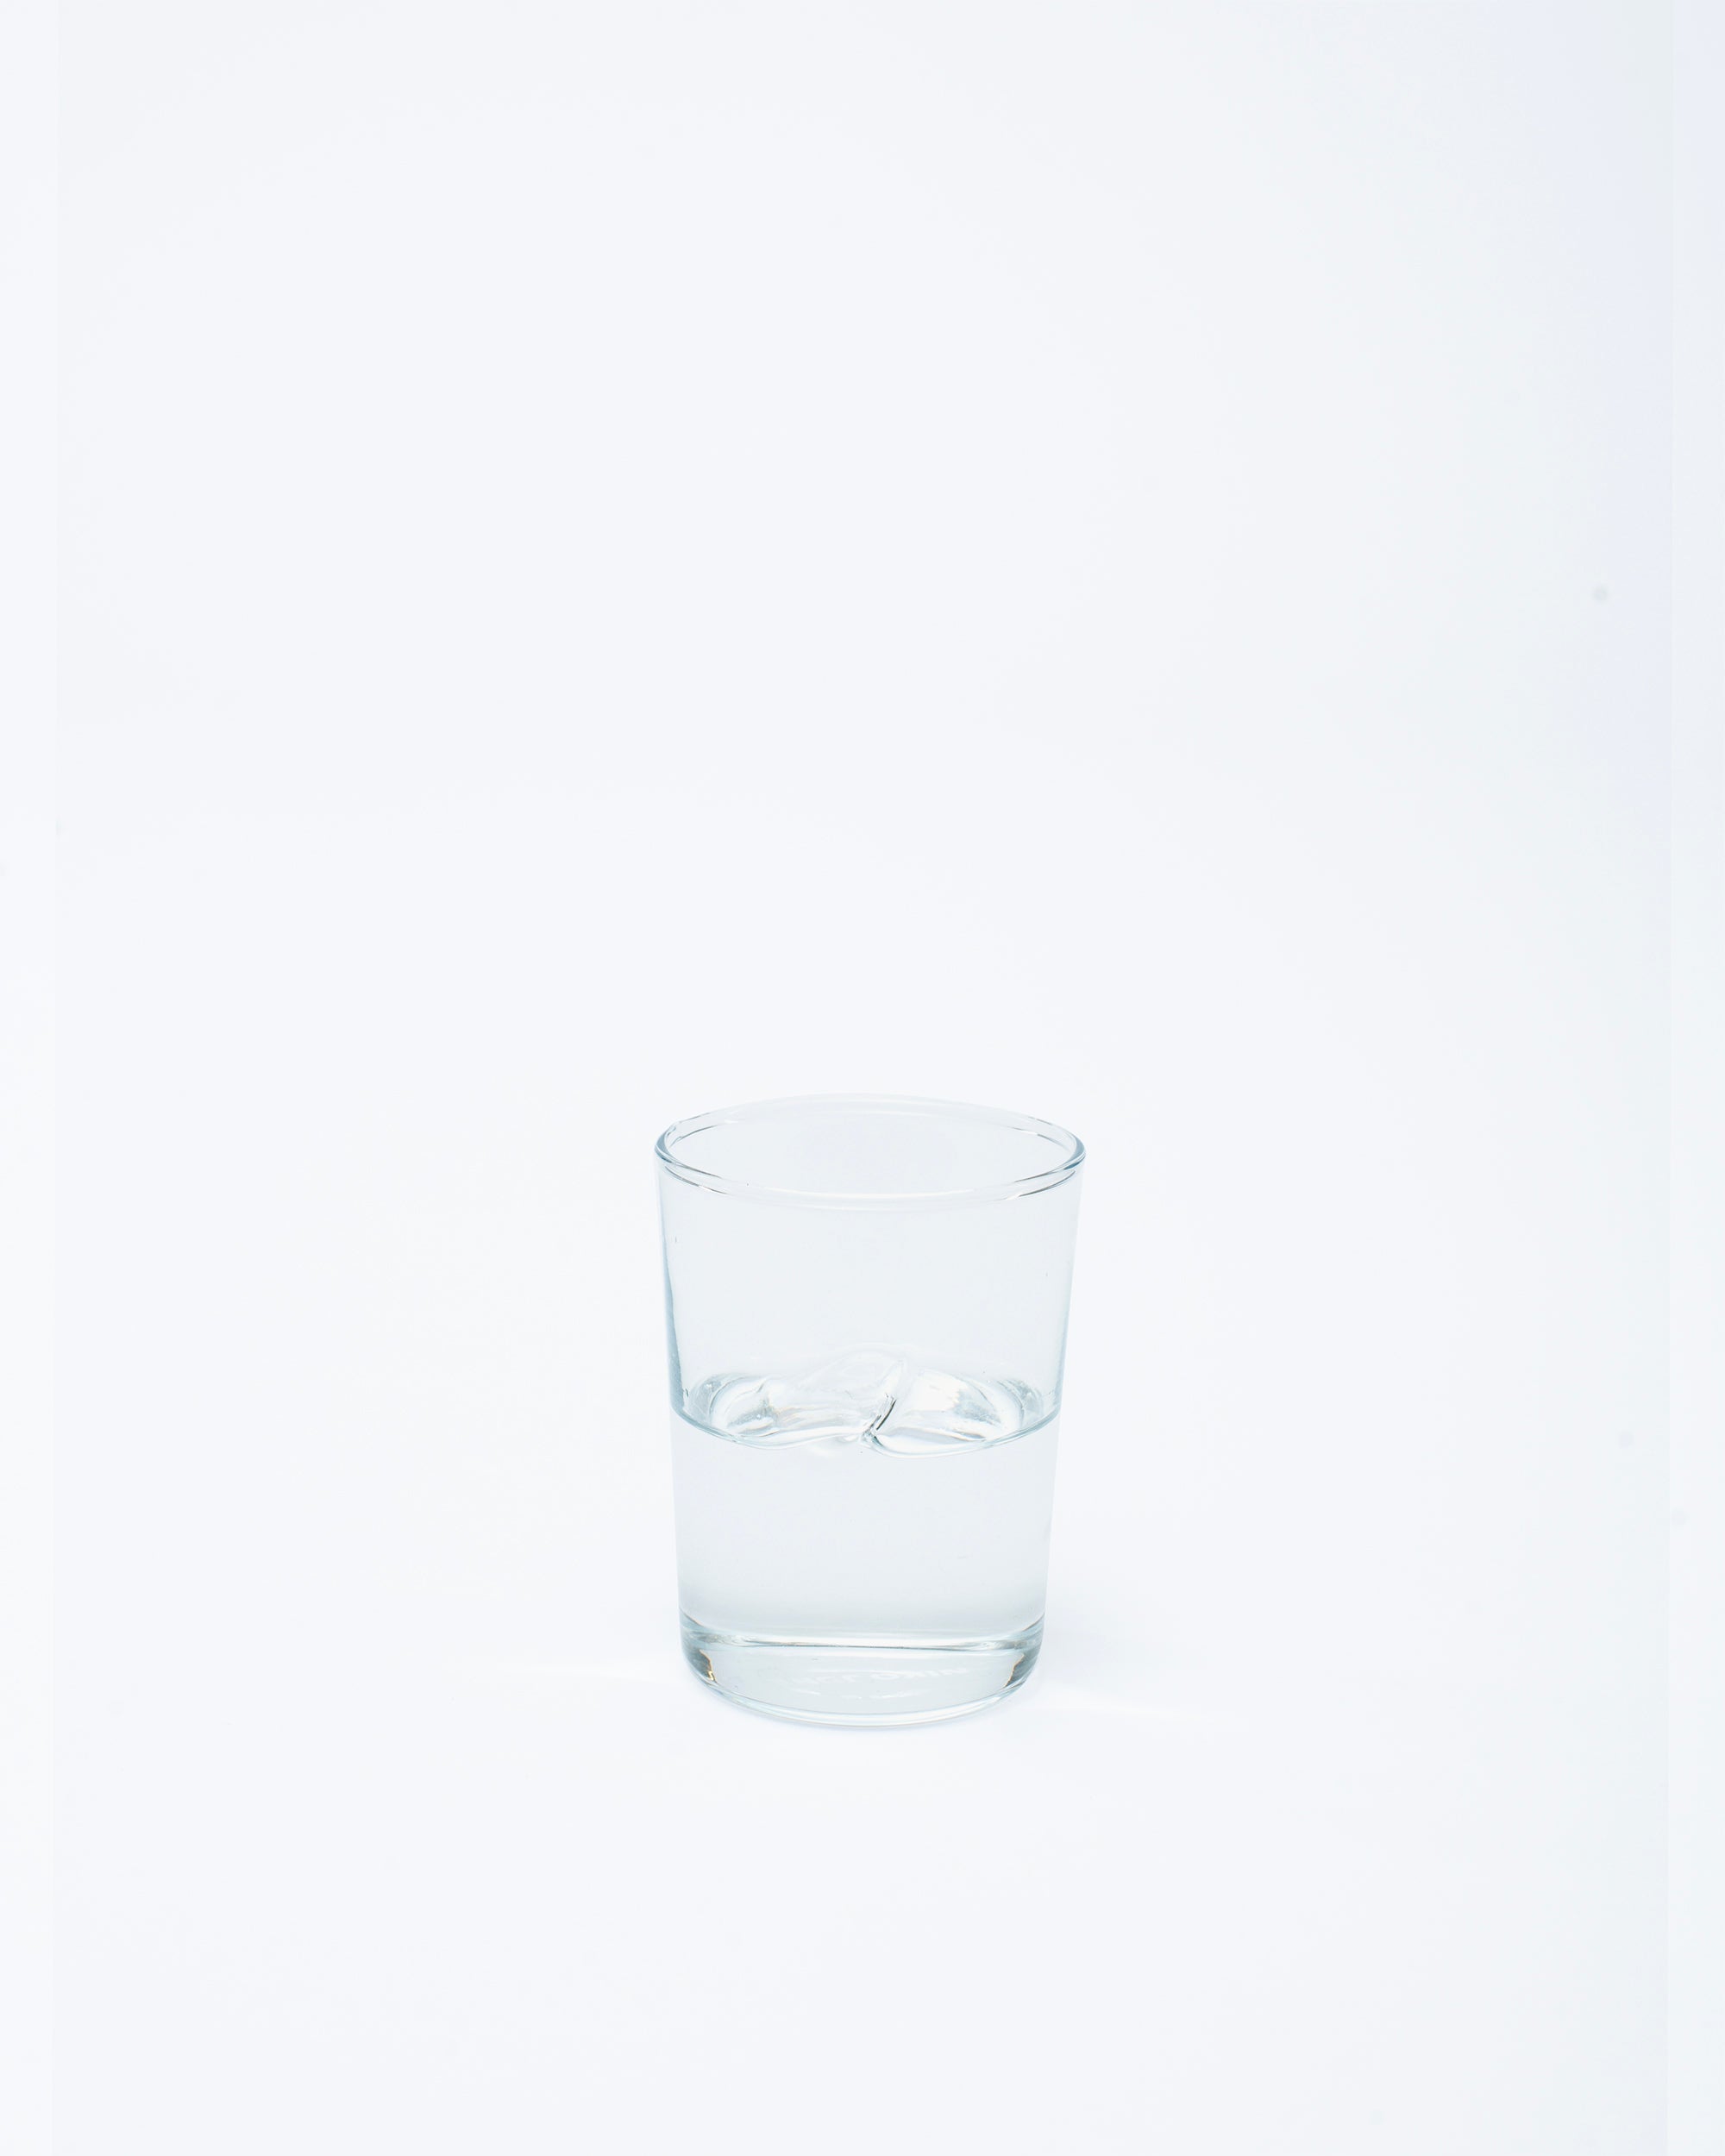 Glass with a handmade dot design with water on a white background